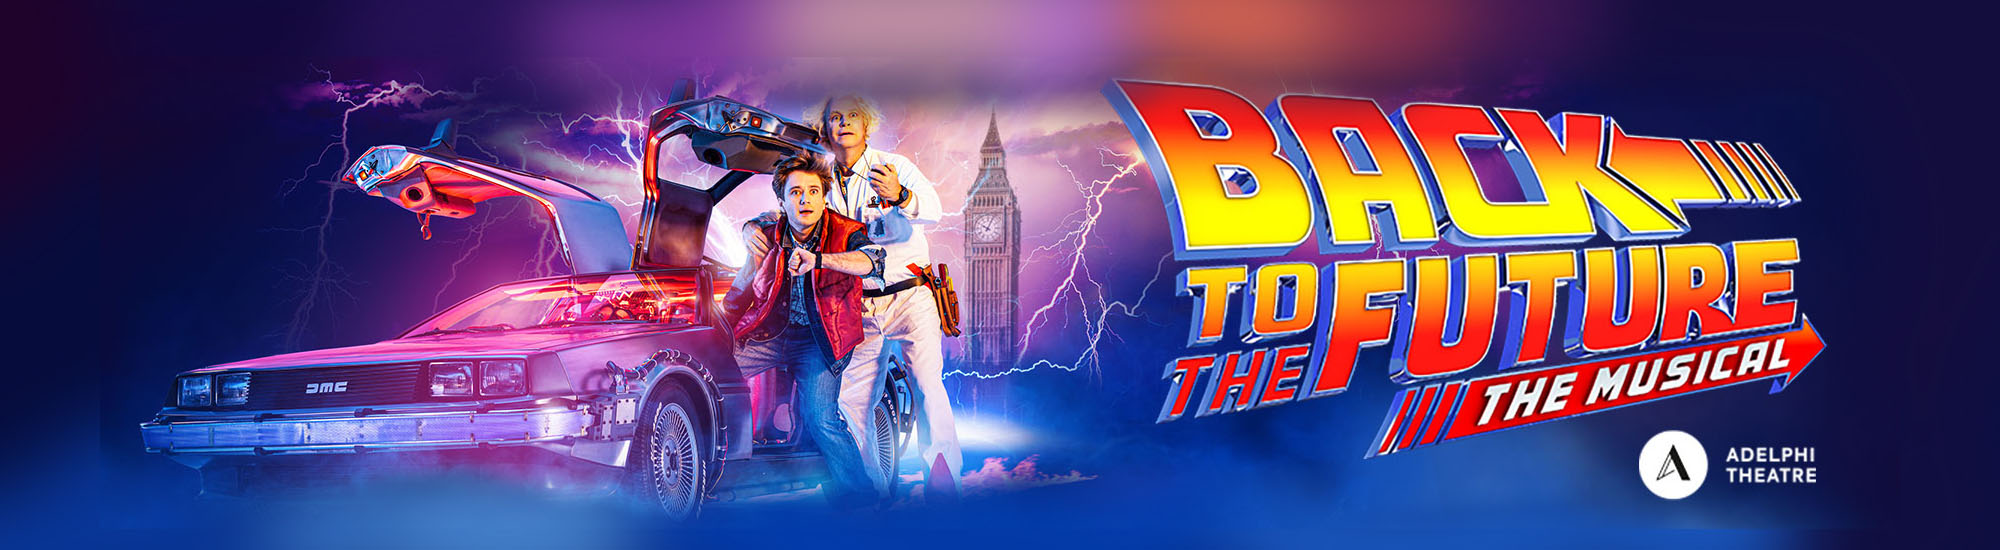 tourhub | Just Go Holidays | Back to the Future The Musical - Evening Show 